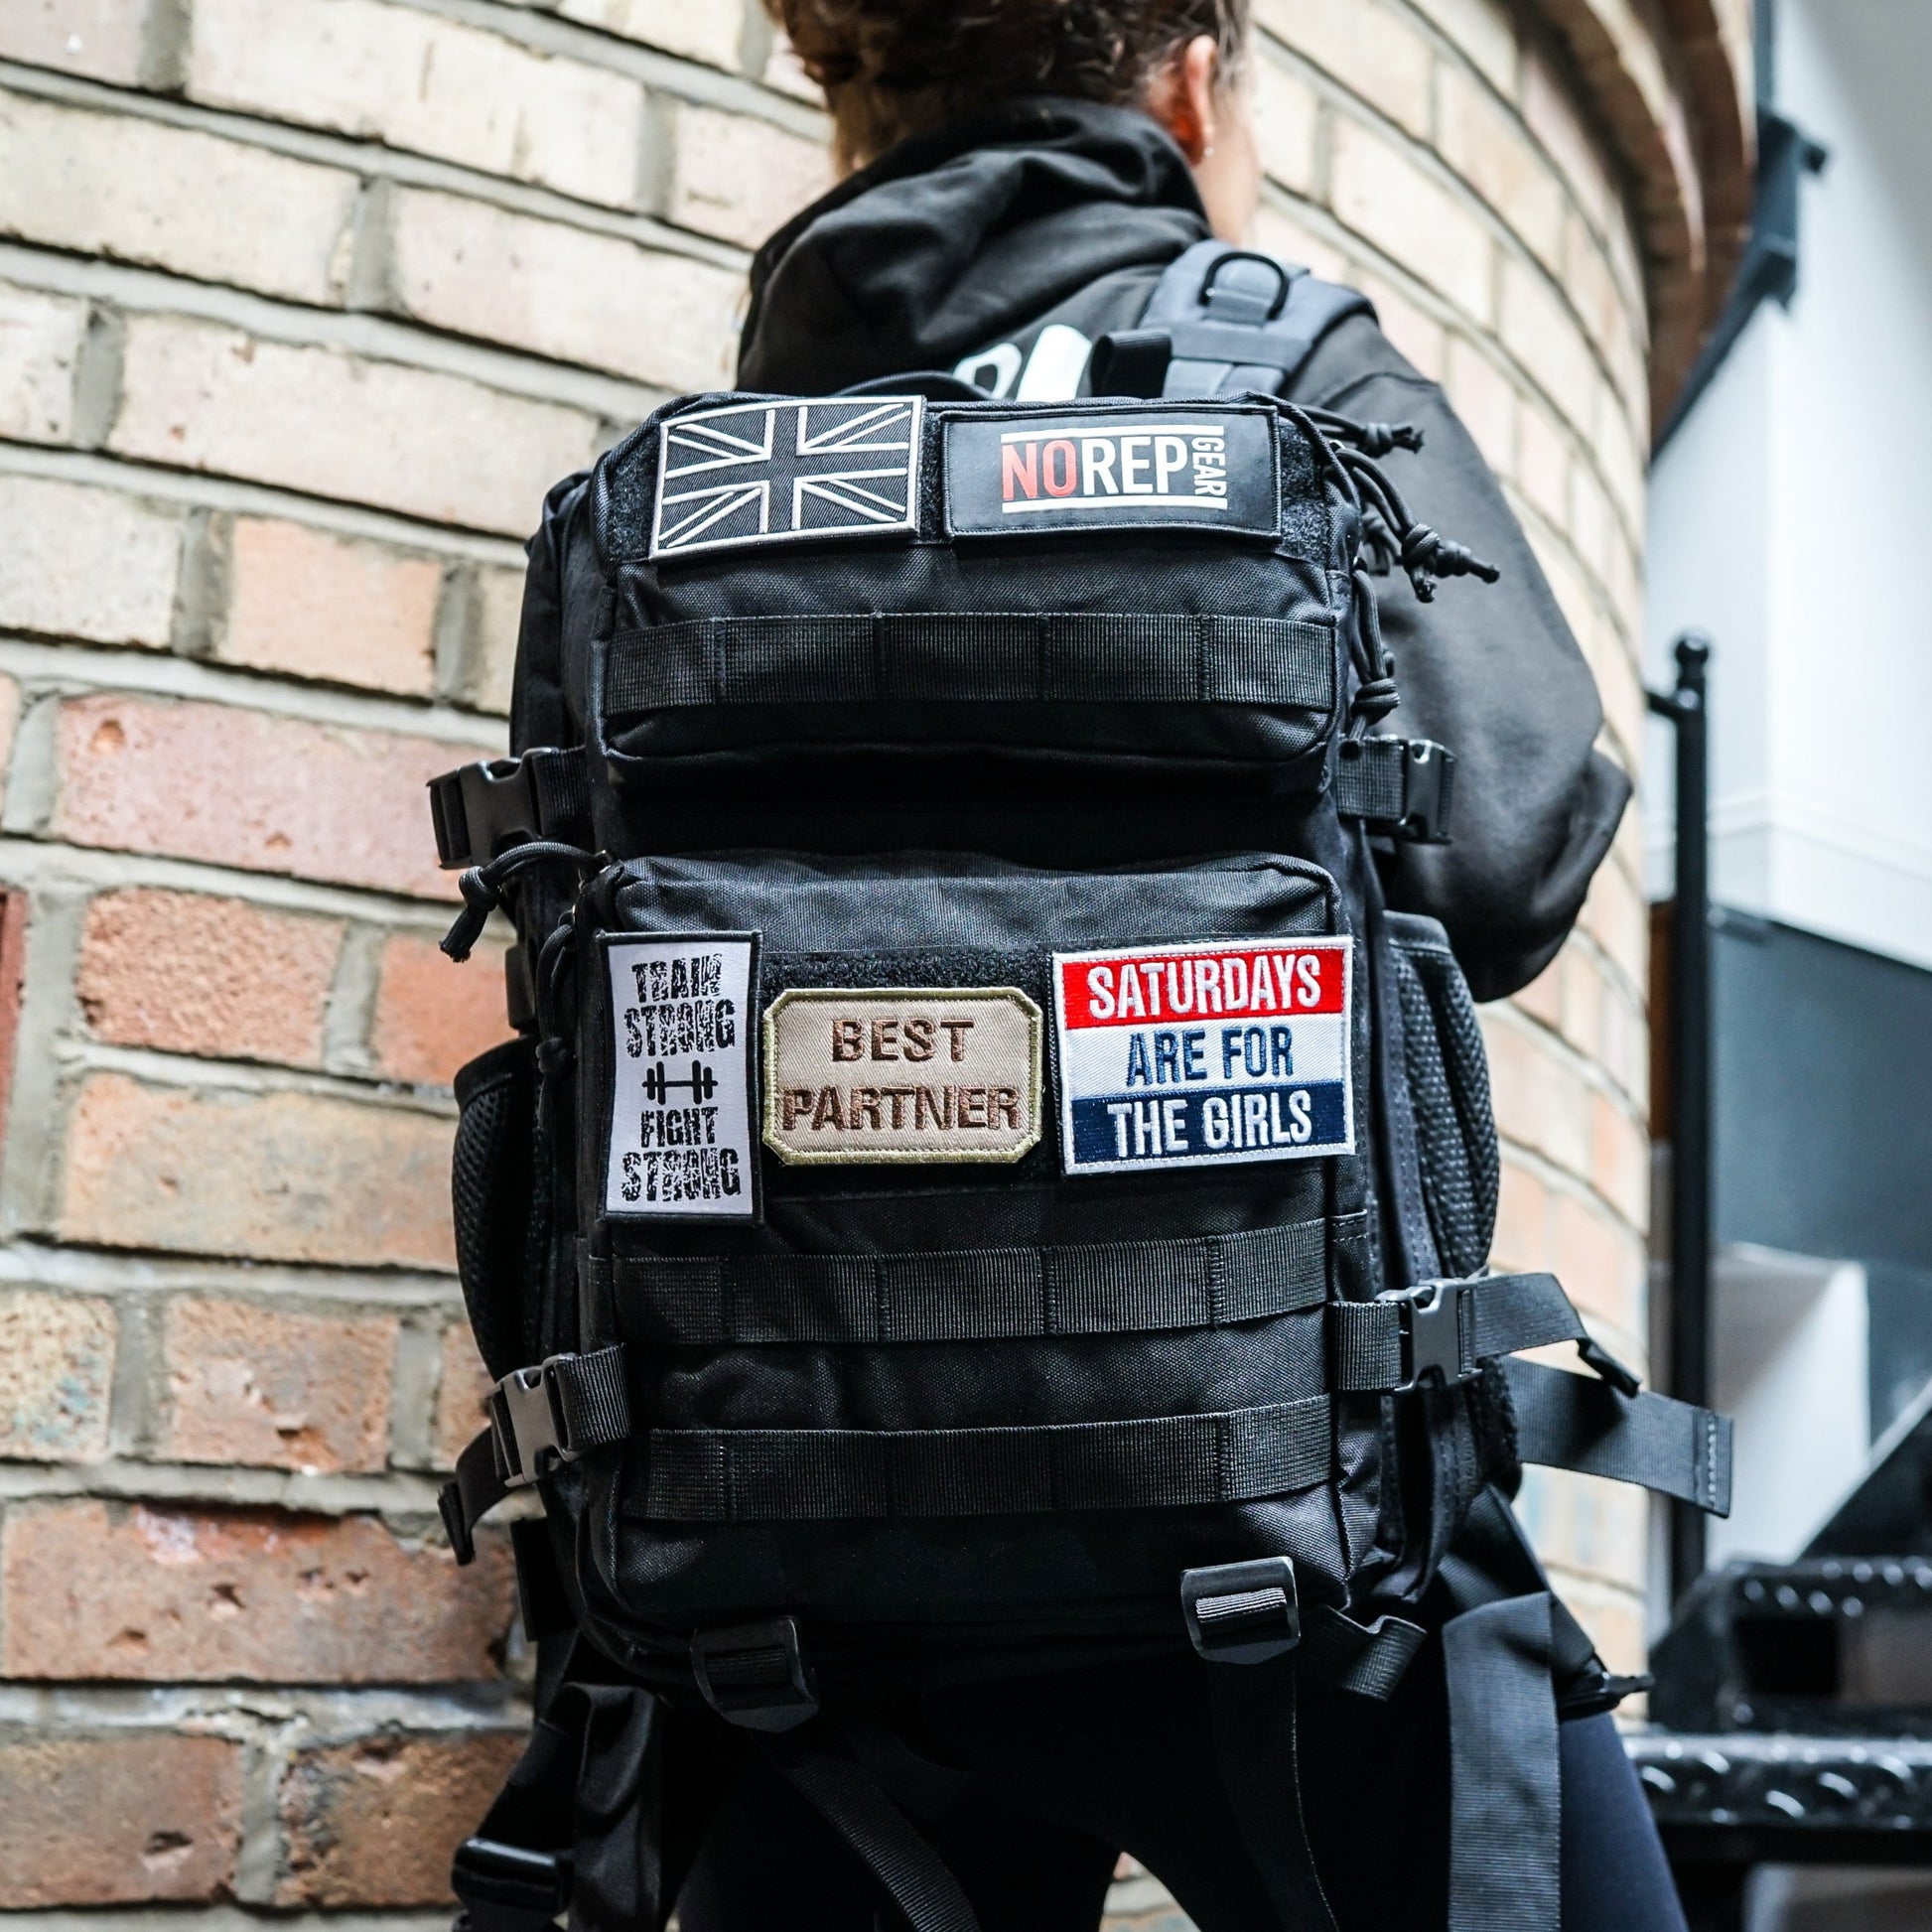 Icon 2.0 25L Tactical Backpack